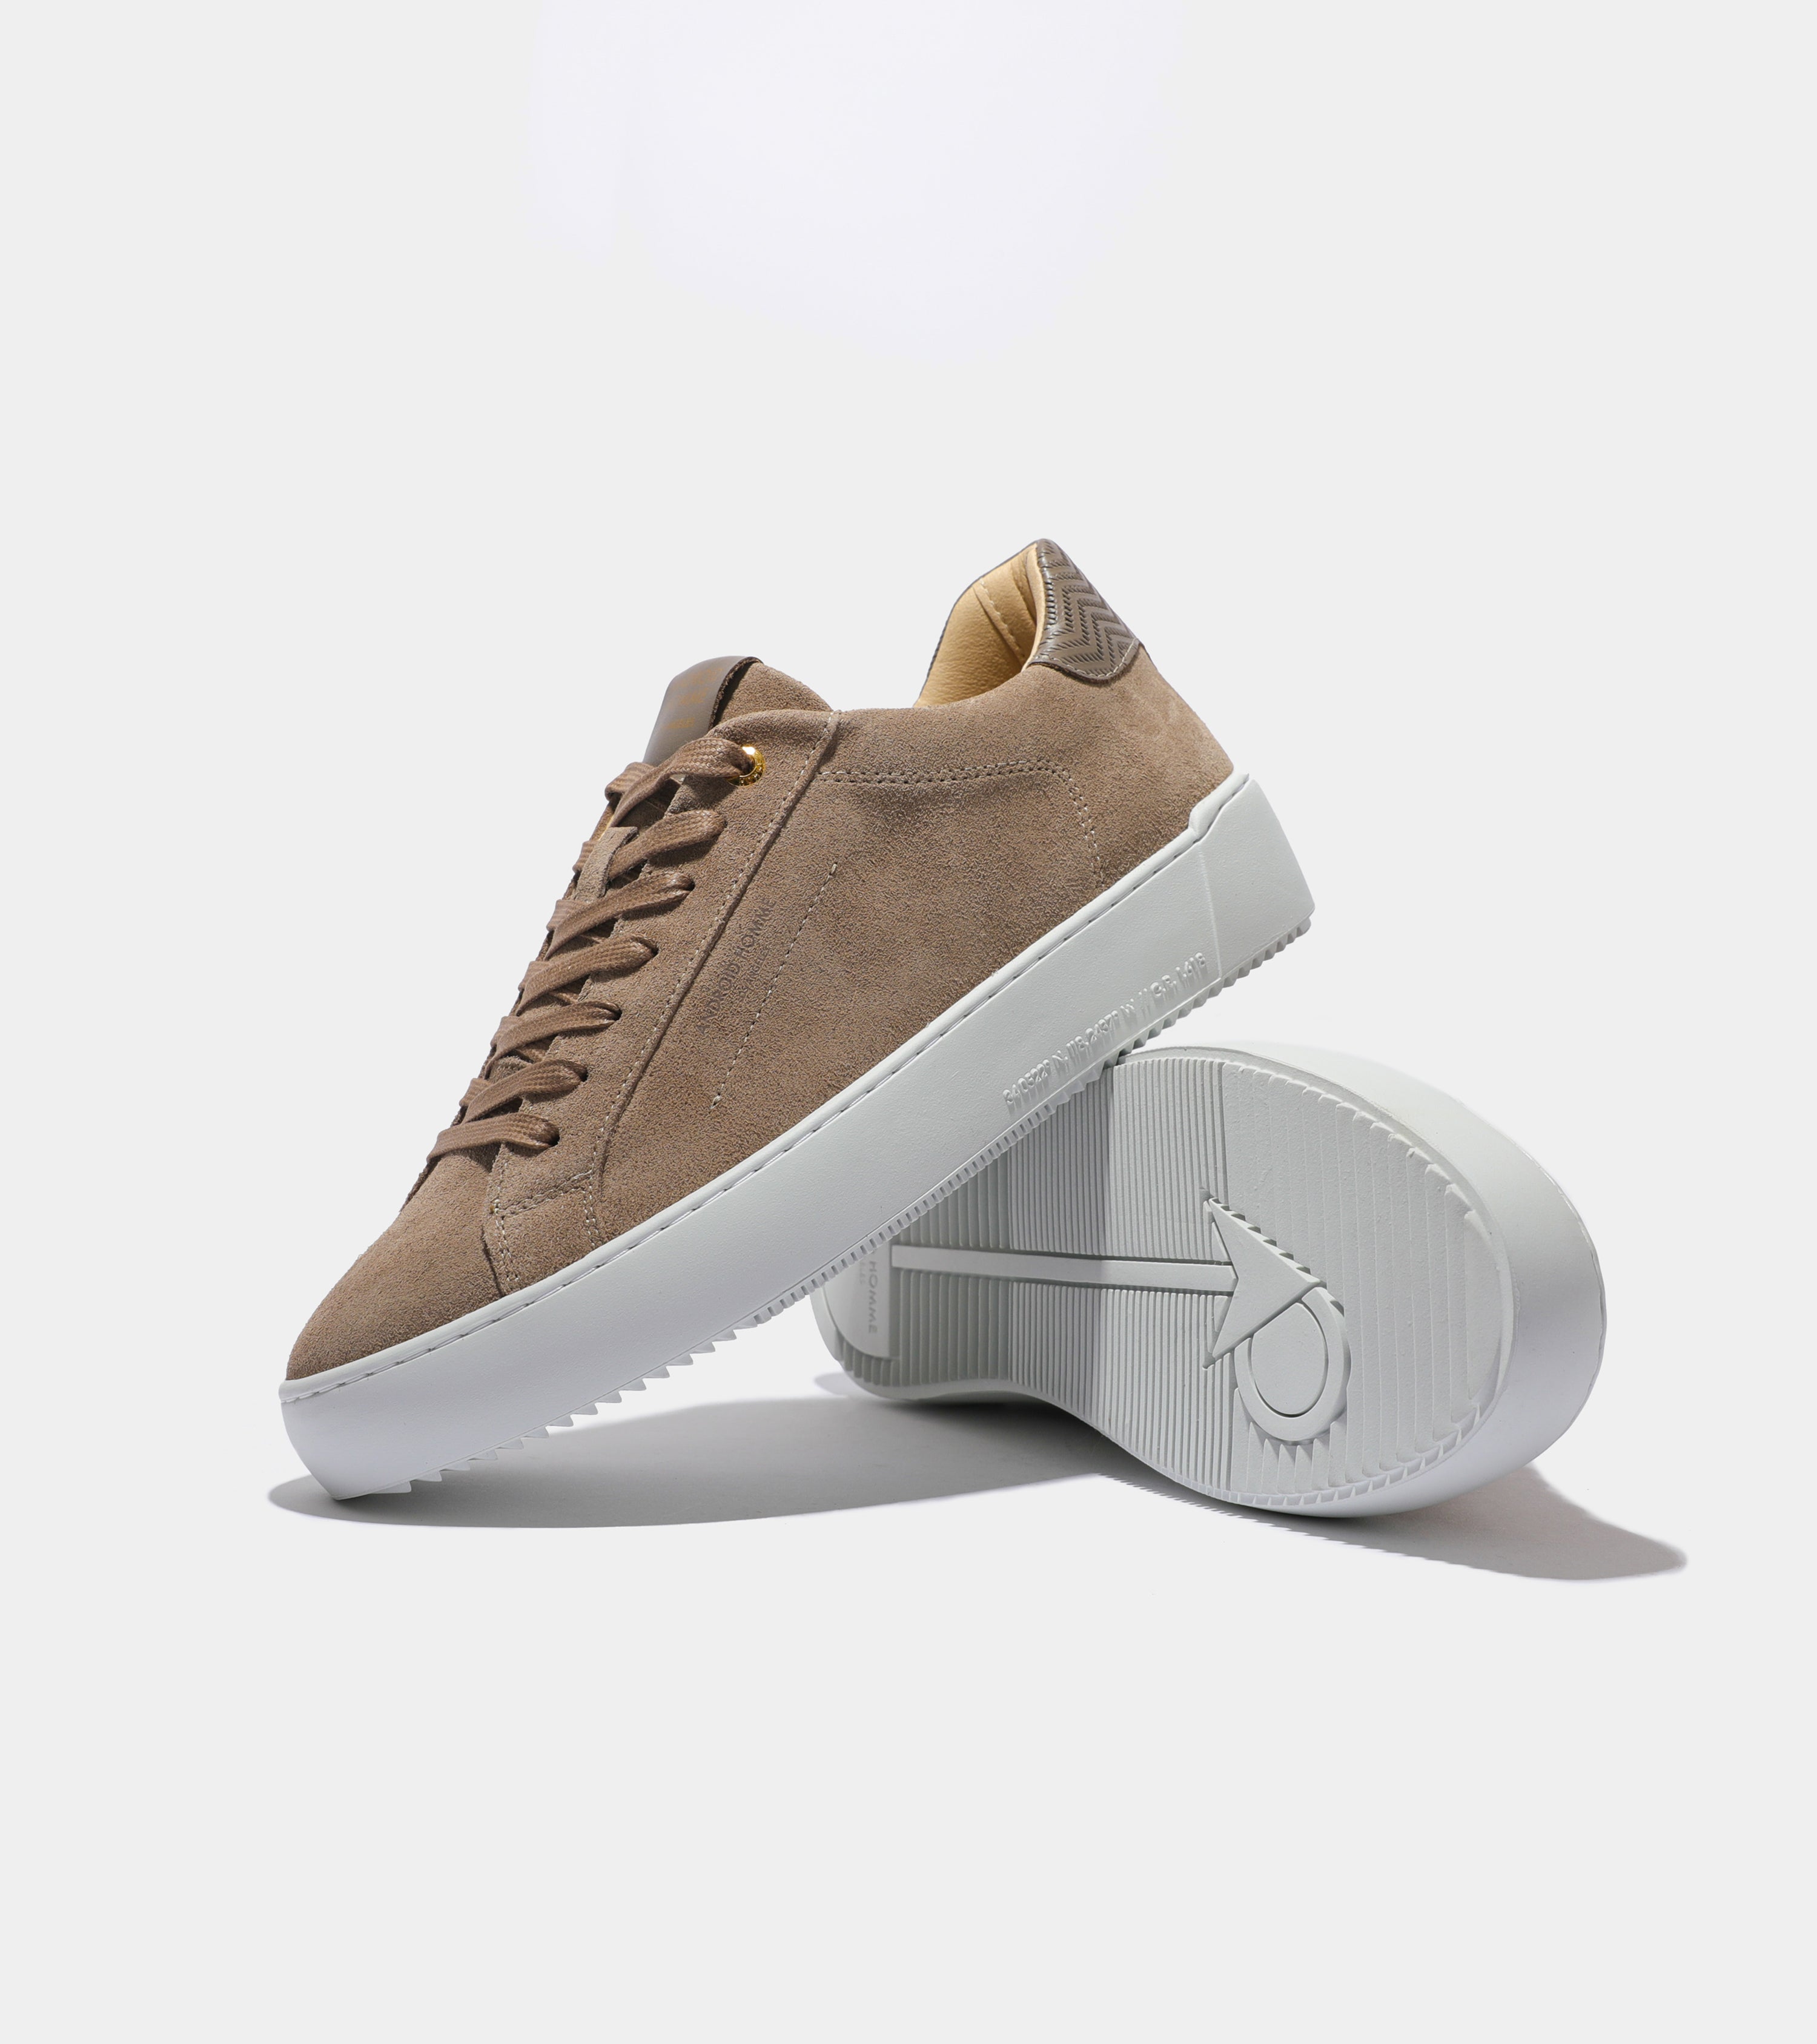 Ecom imagery of the Zuma Taupe Suede Zig Zag Leather Android Homme Trainers.